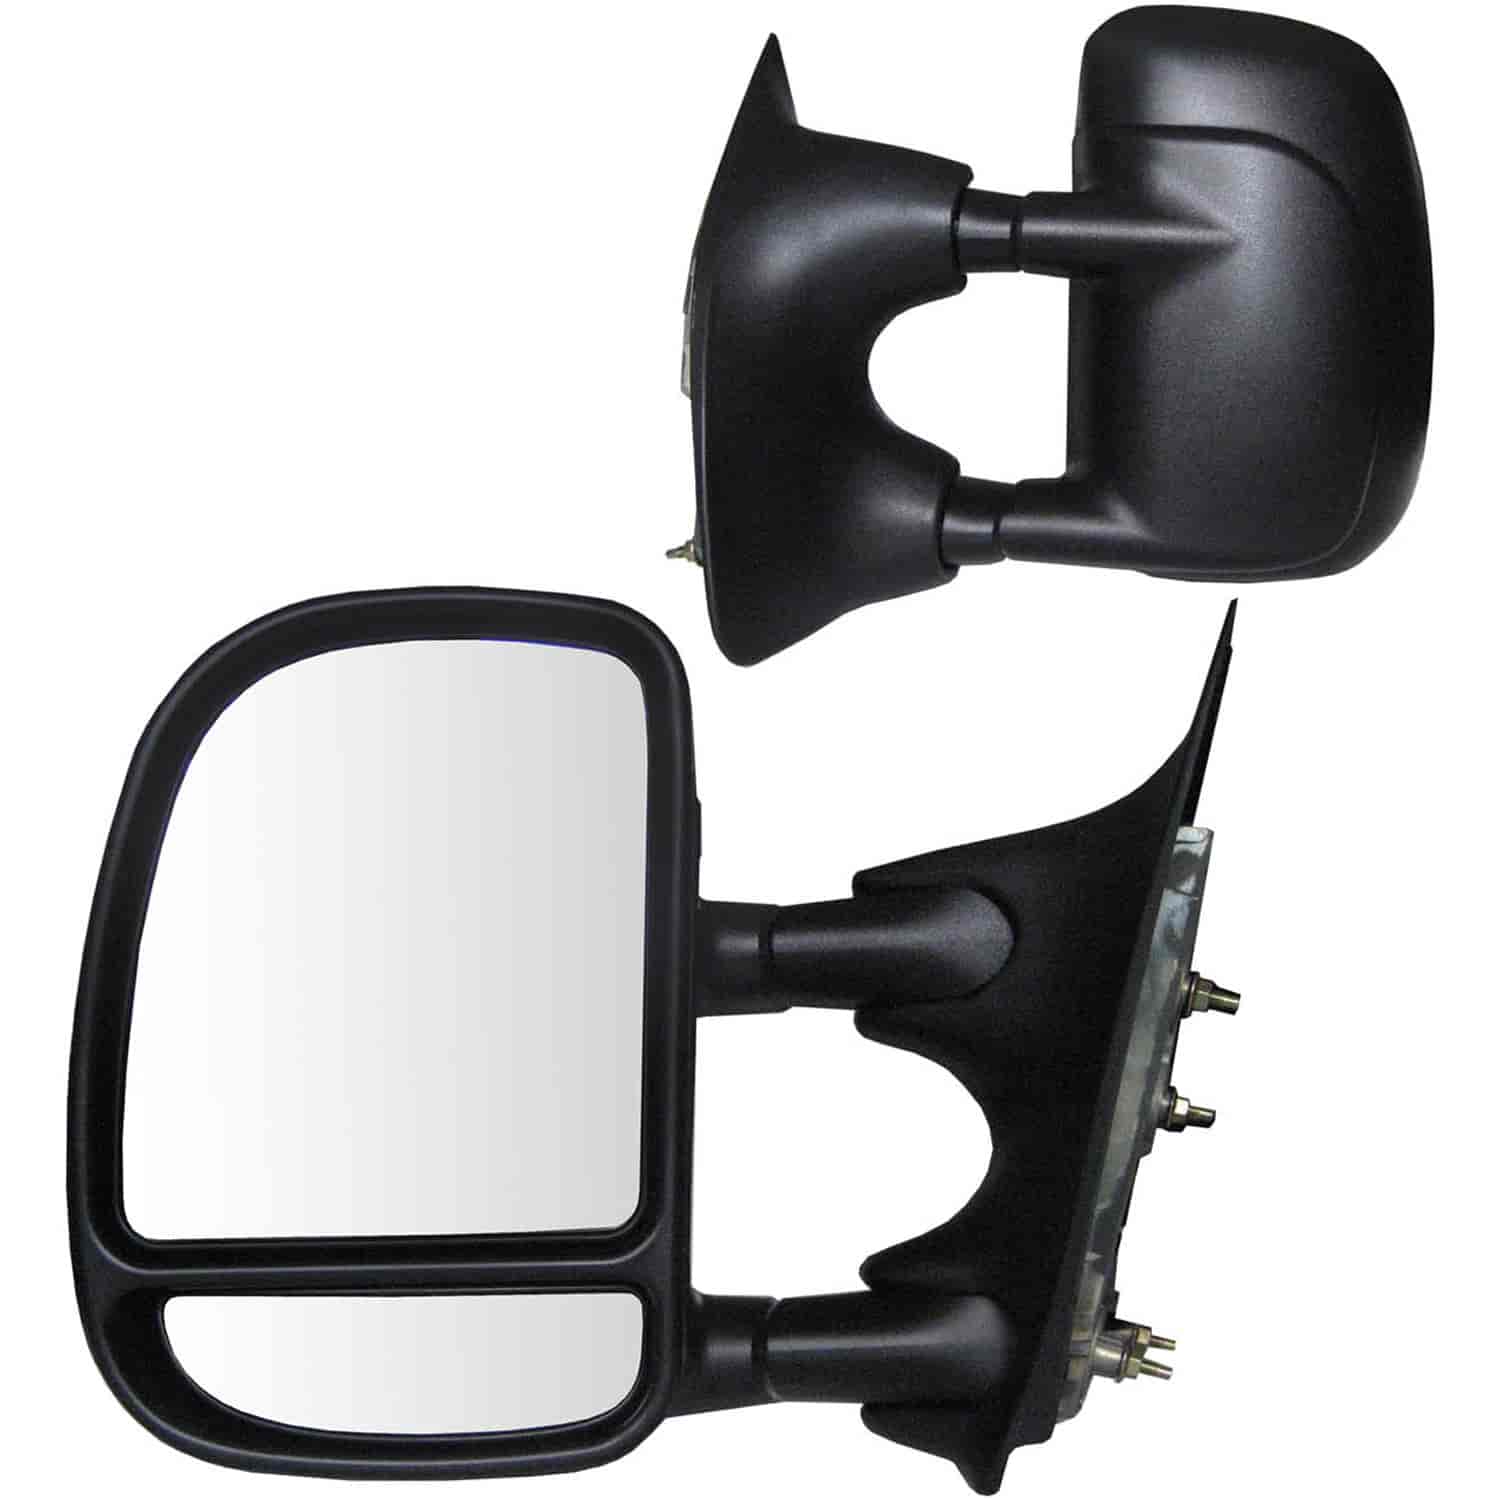 OEM Style Replacement mirror set for 00-05 Ford Excursion 99-07 F250/ F350/F450/ F550 Super Duty Pic